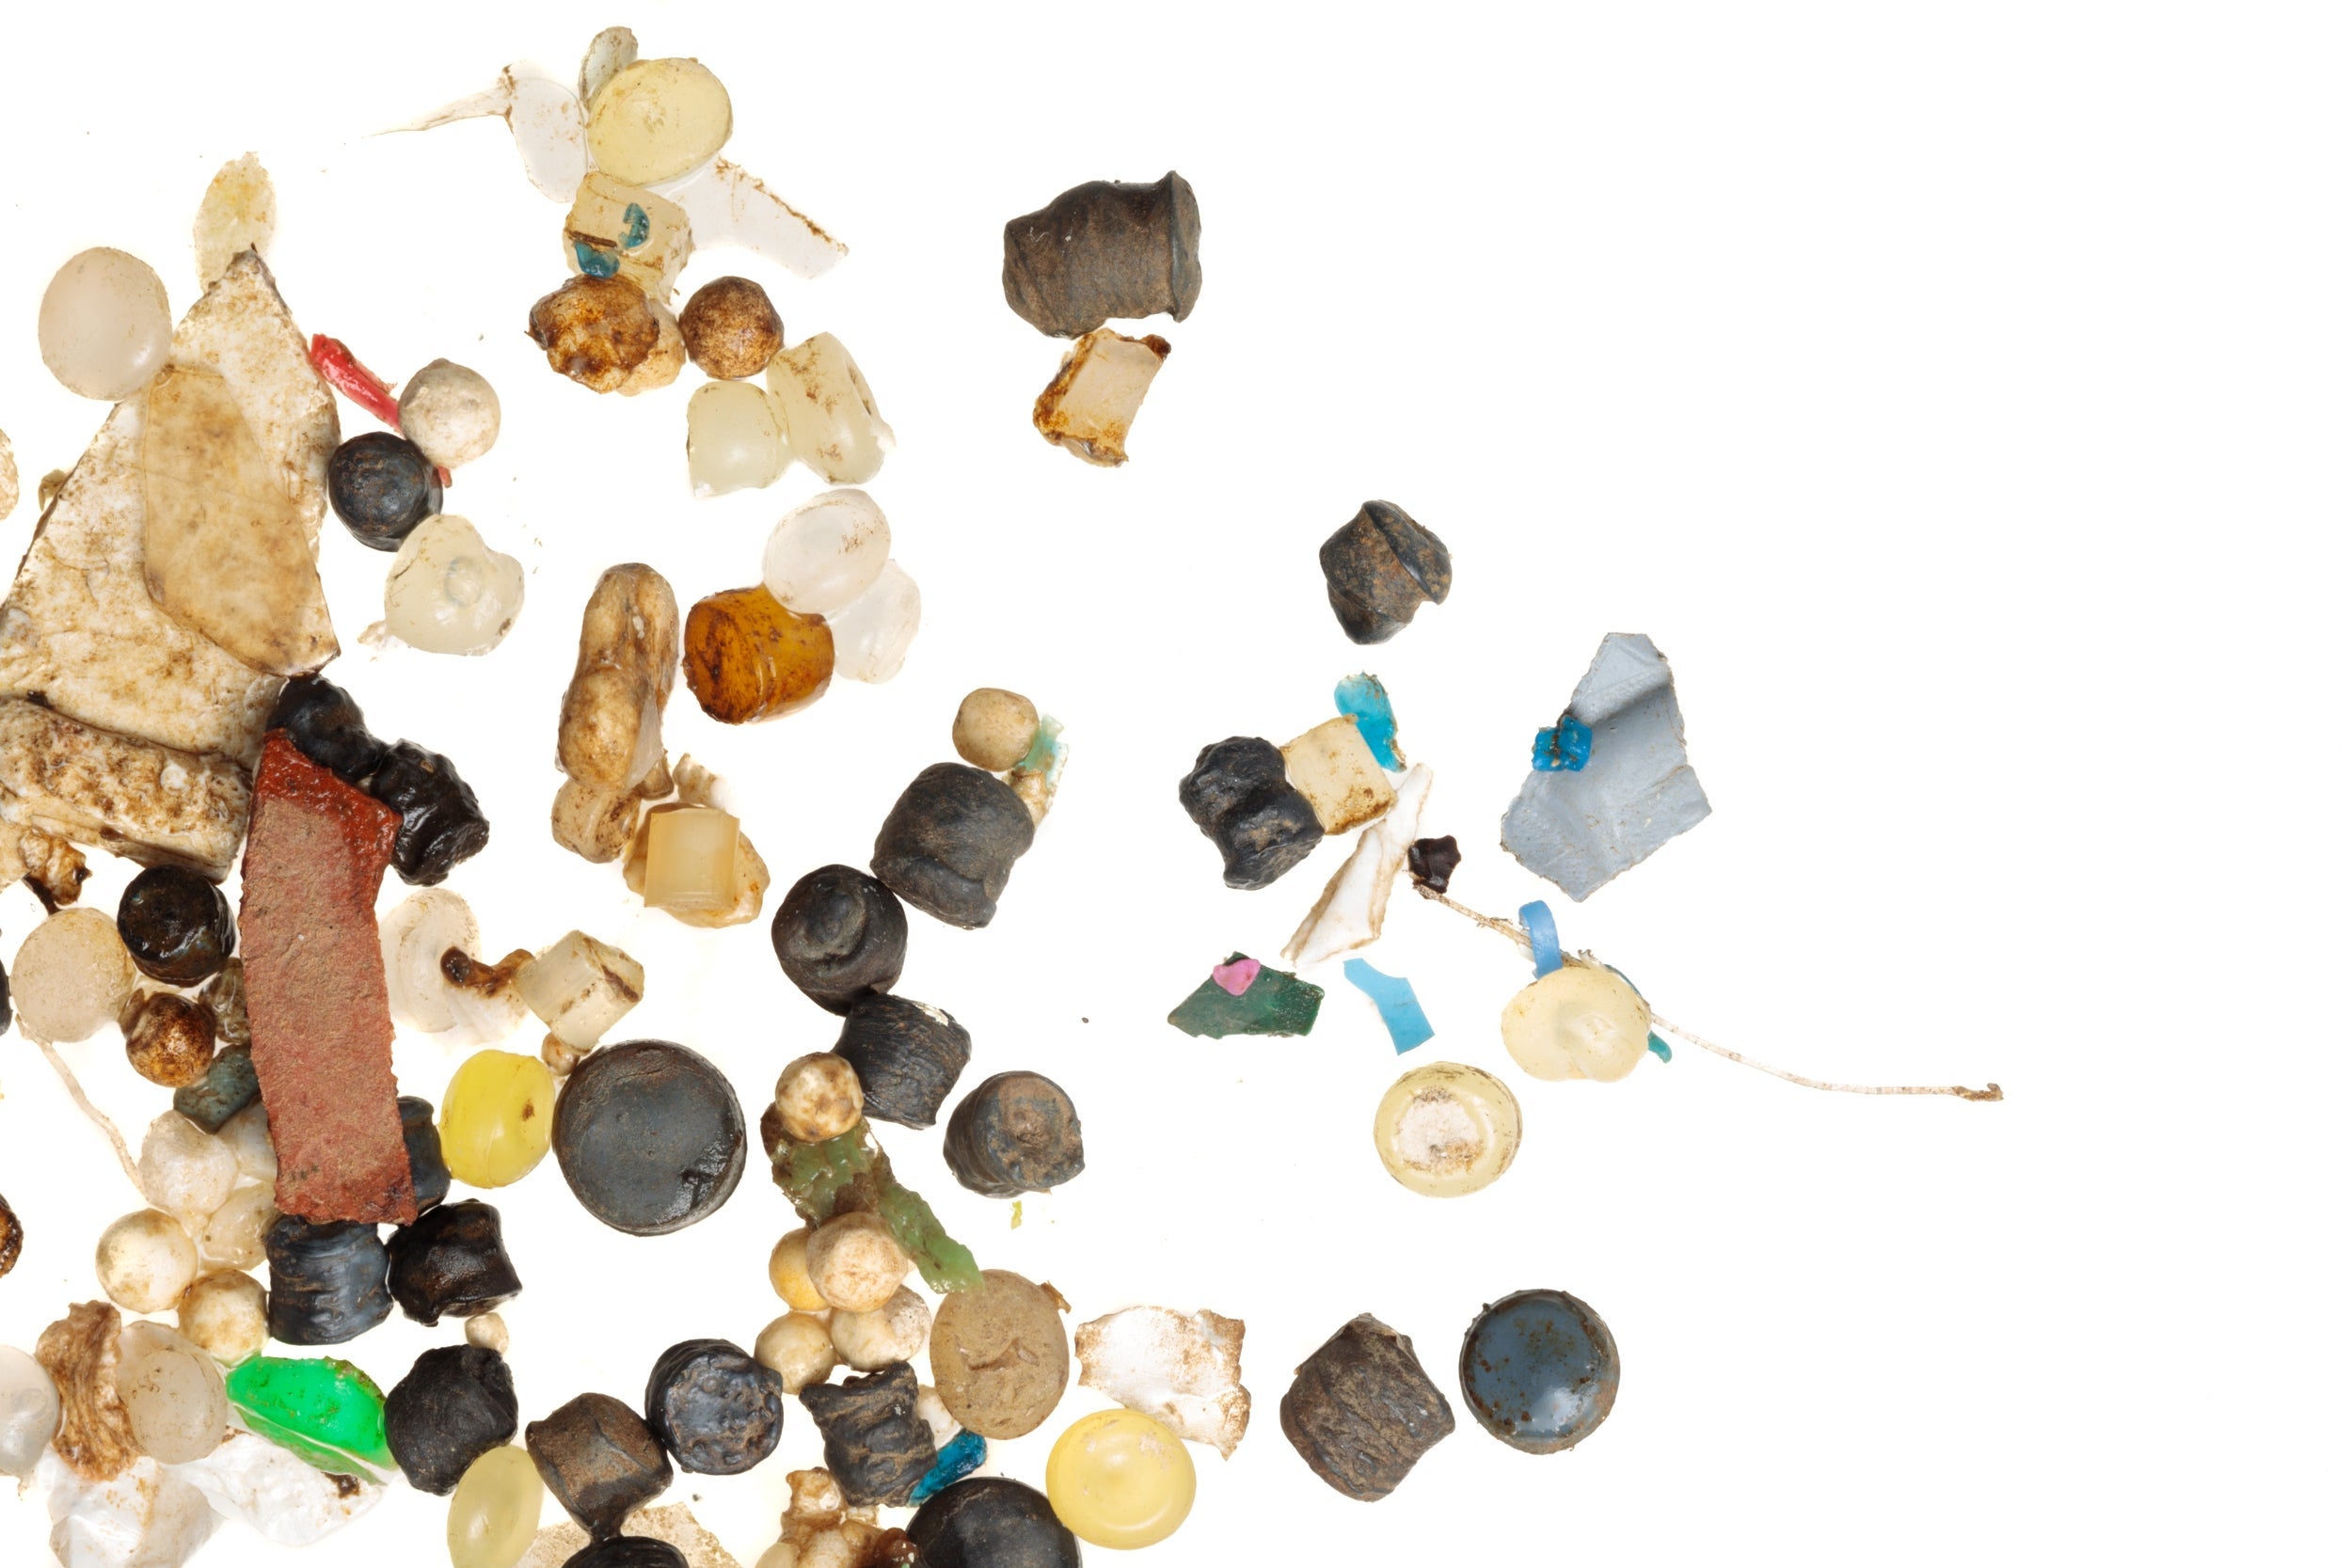 A sample of microplastics pulled out from the River Mersey in the UK